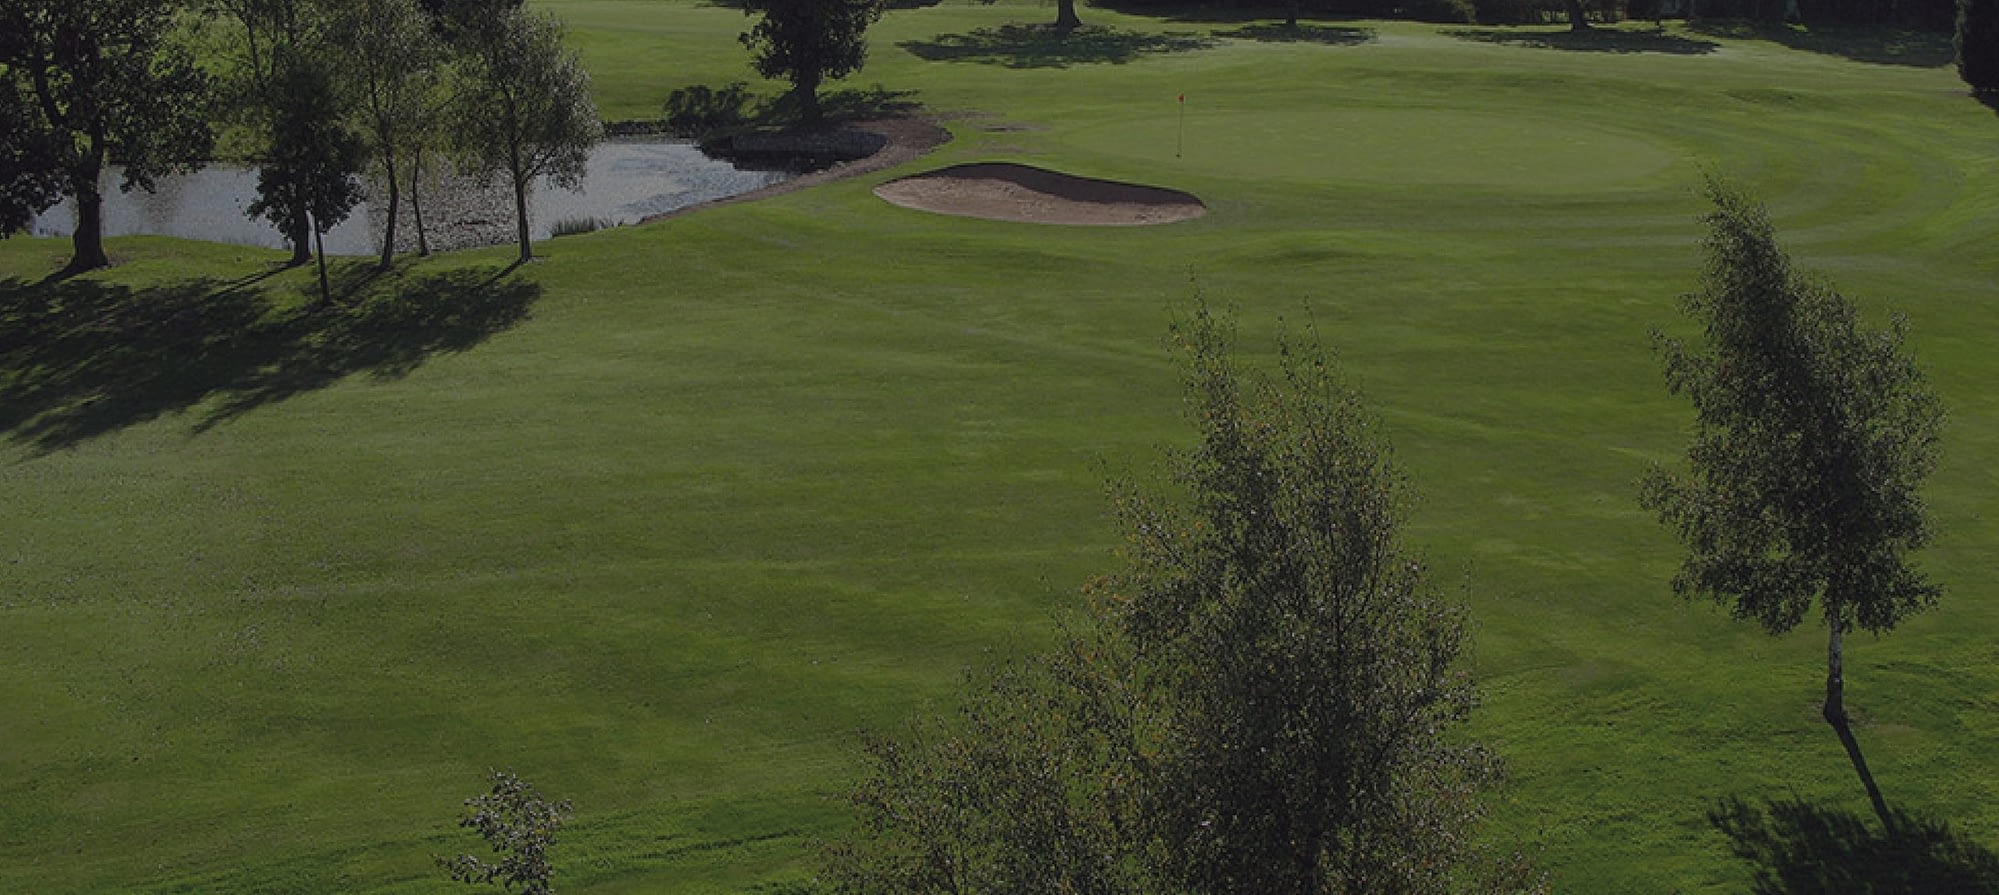 Welcome to Oakridge Golf Club Nestled in the heart of the spectacular Warwickshire countryside, Oakridge is a family-run golf club renowned for its friendly atmosphere and distinctive parkland course.